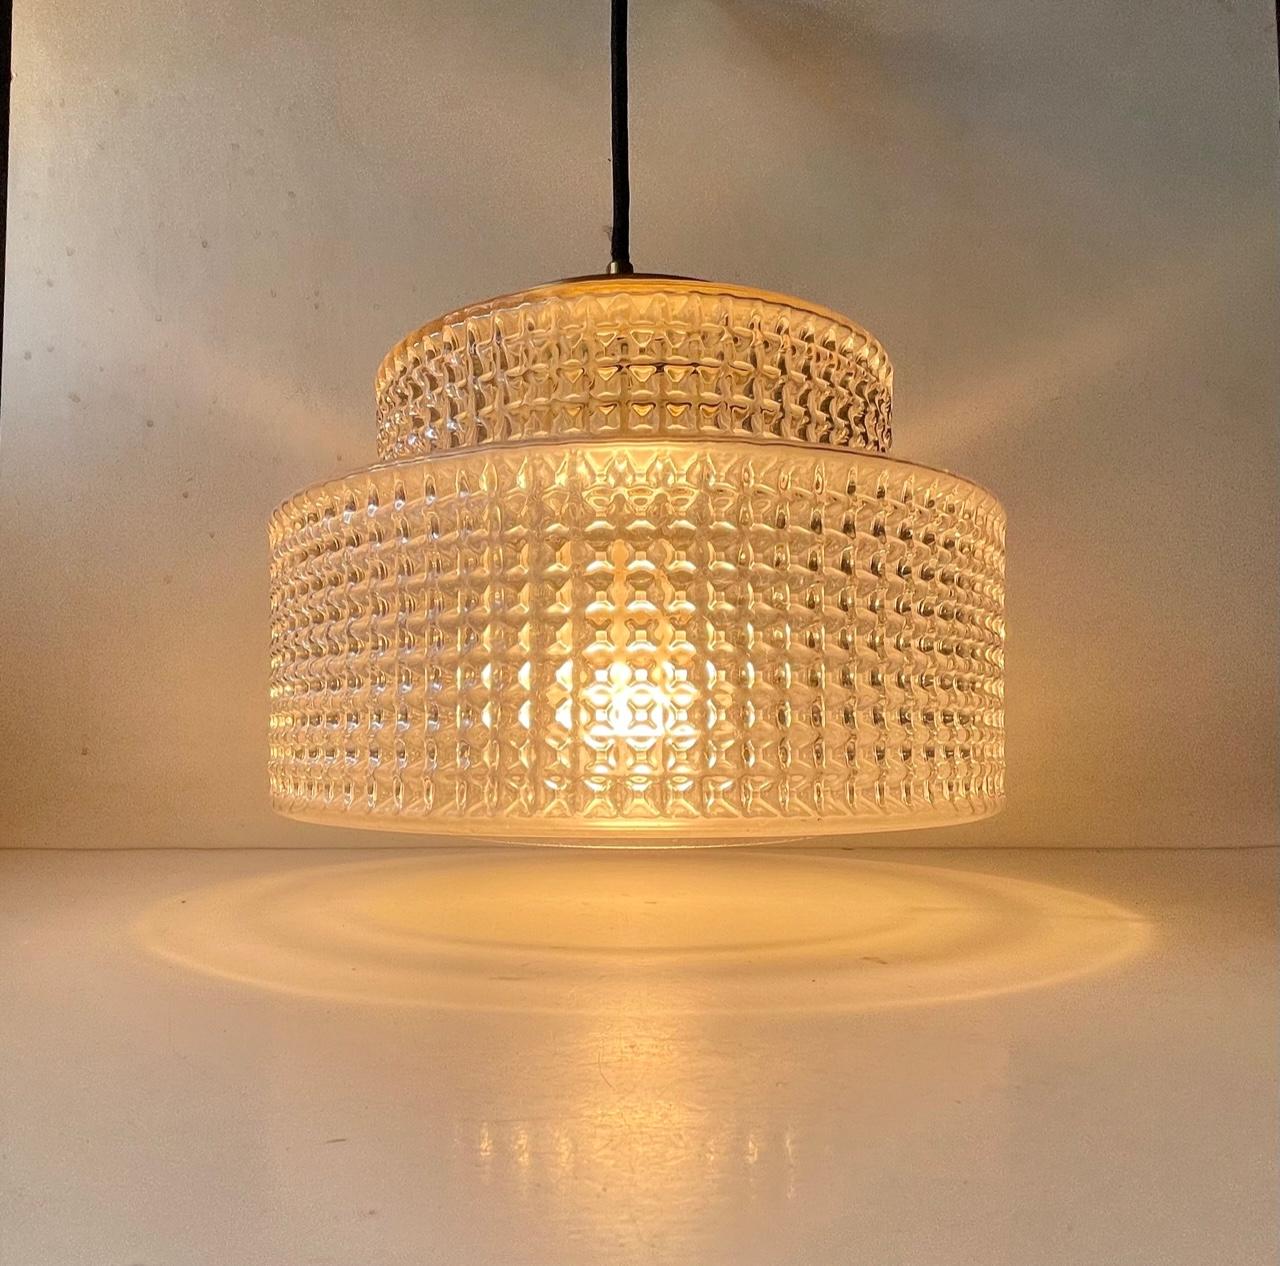 A stylish hanging light designed and manufactured by the Danish design trio Vitrika in the 1960s. The name Vitrika, or Vi-Tri-Ka means 'The three of us can do it'. The lamp features a geometric - diamond patterned clear glass shade. The top is made